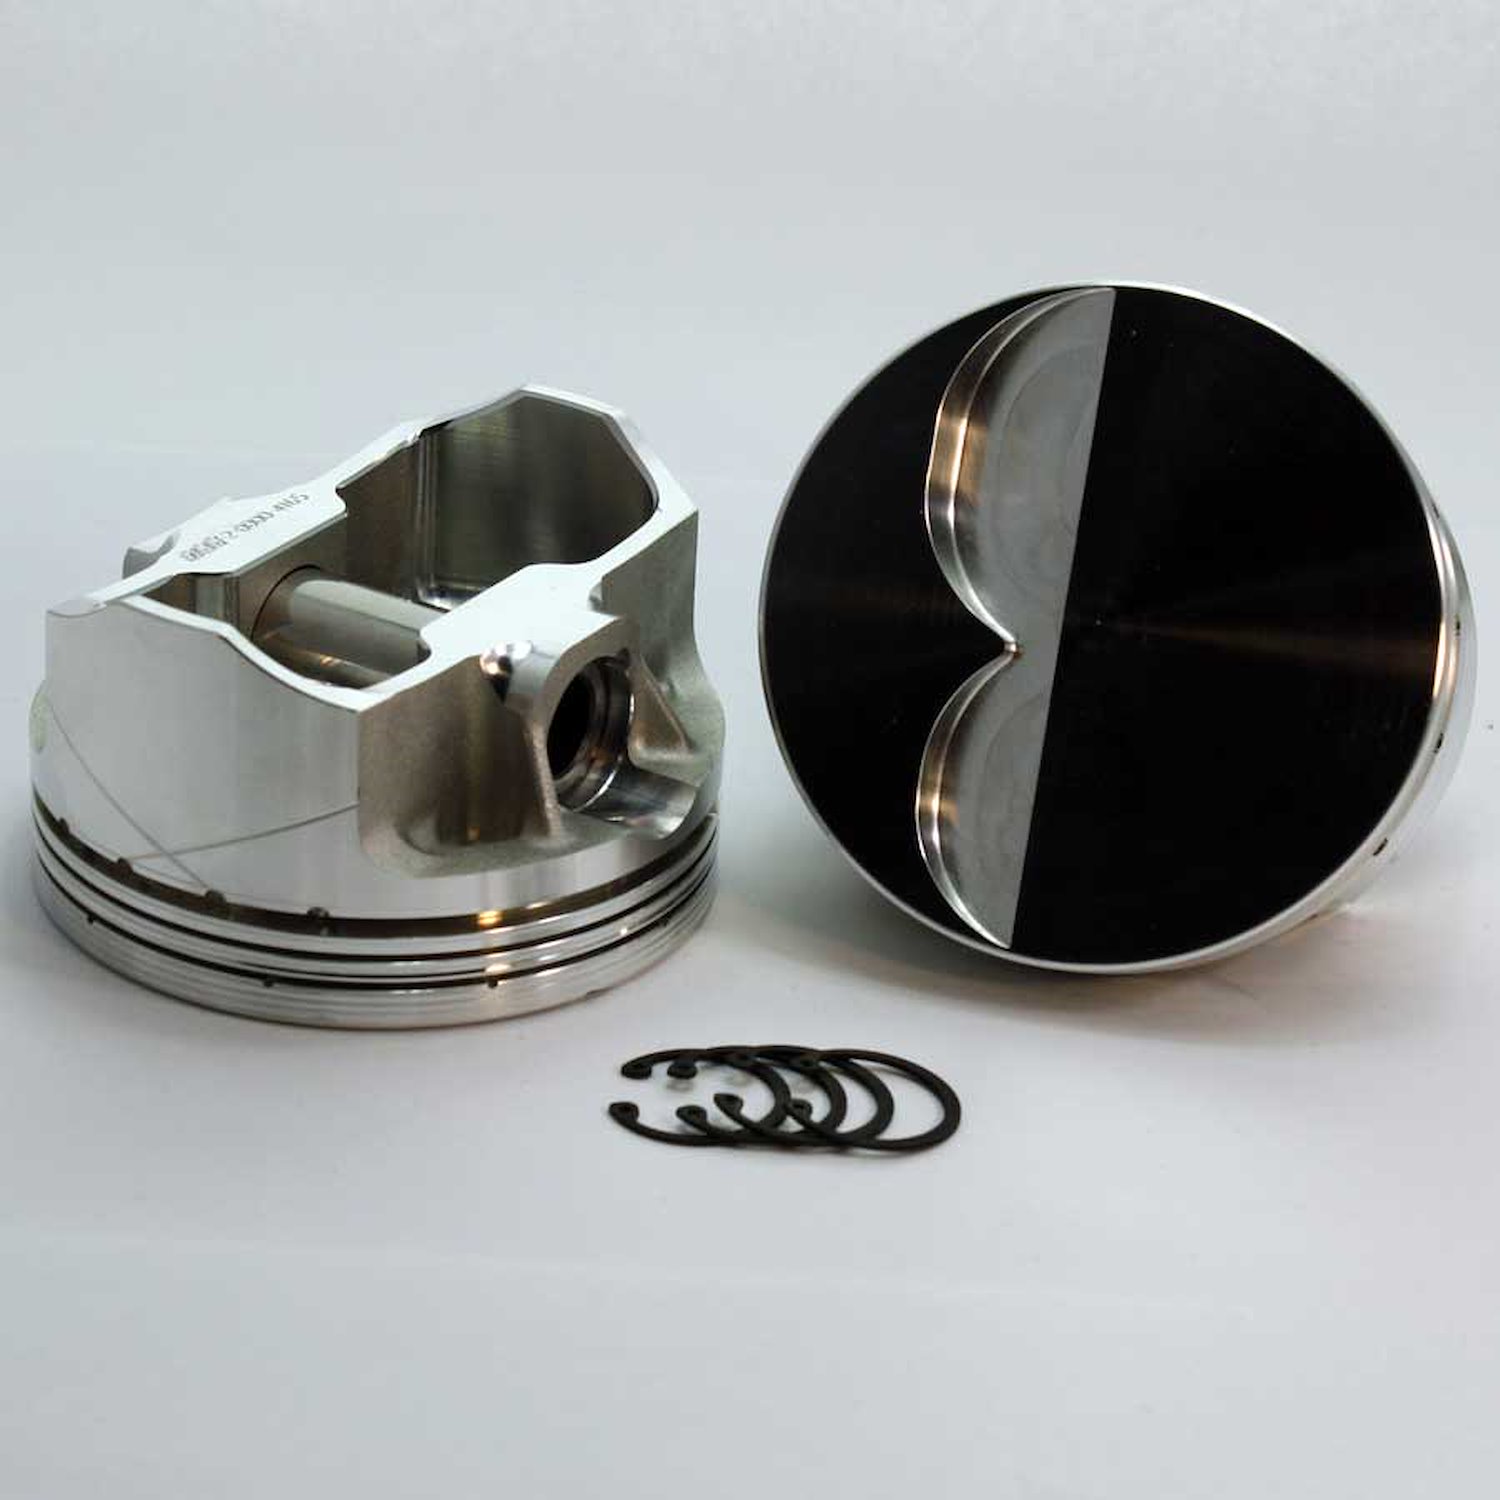 2-3400-4030 FX-Series Flat Top Piston Set for 1962-2001 Small Block Ford 289-302, 4.030 in. Bore, -4cc Volume [OEM Stroke]